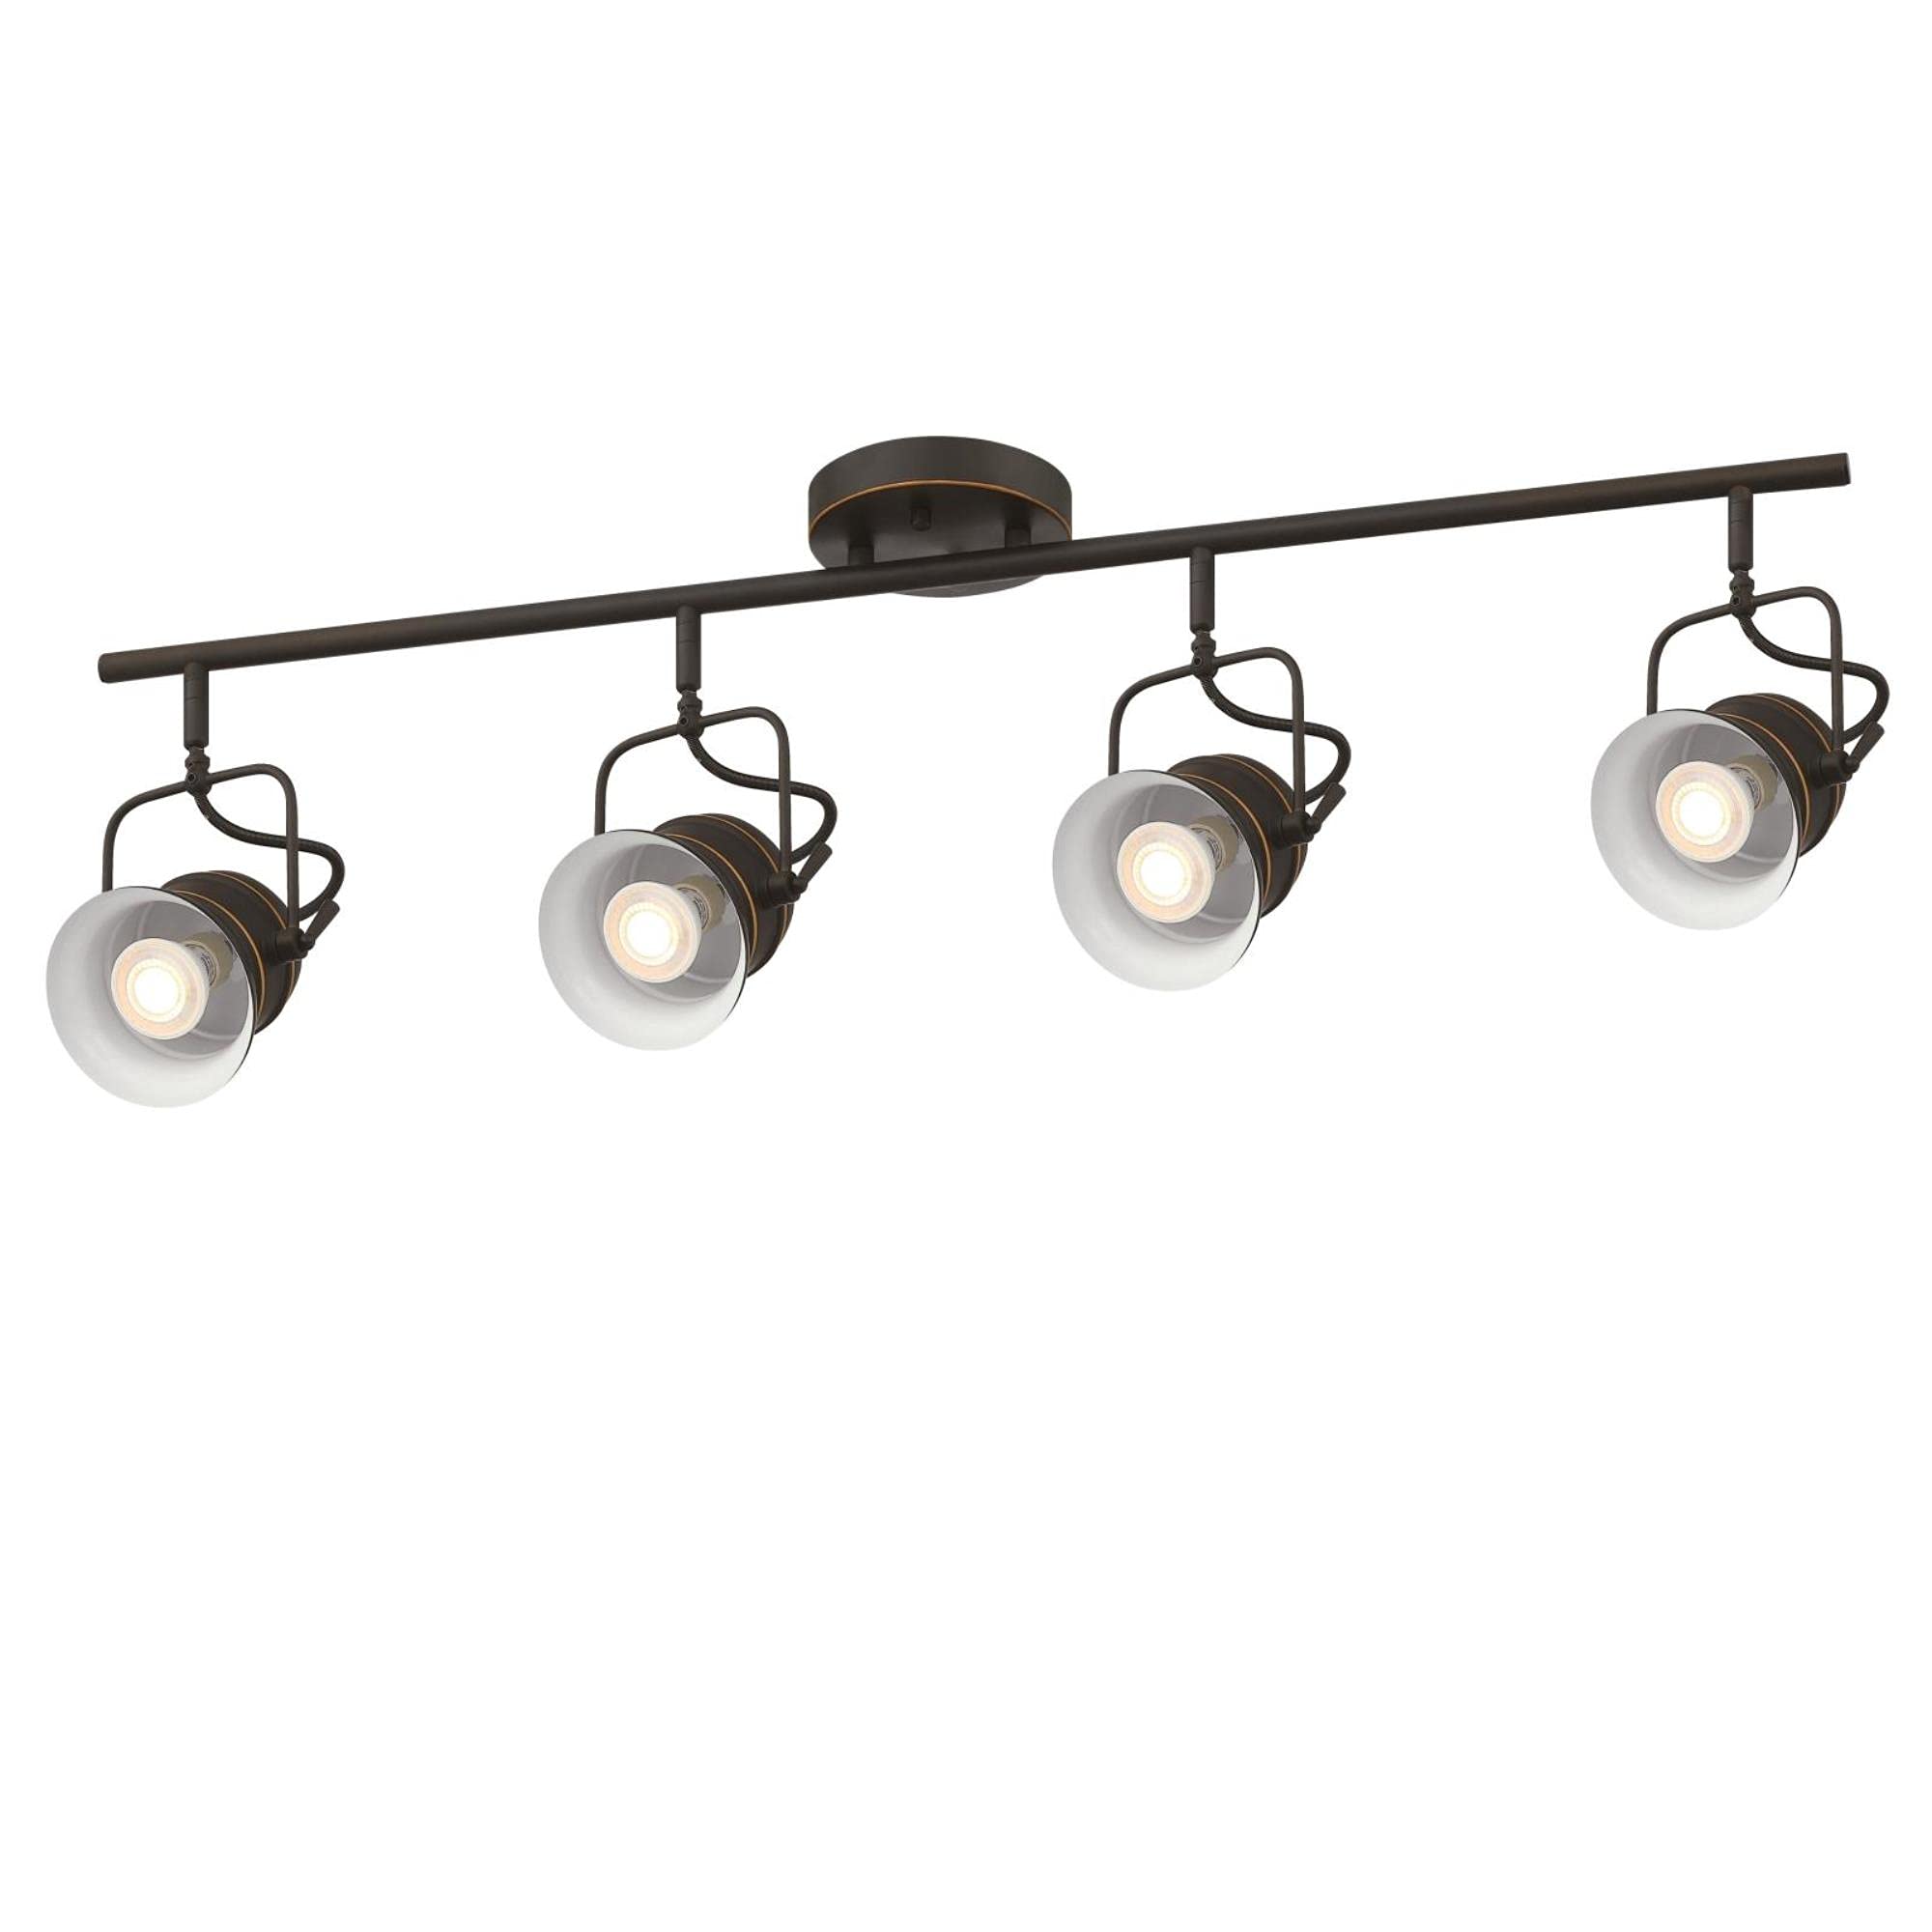 Westinghouse Lighting 6116800 Boswell Vintage-Style Four-Light Indoor Track Light Kit, Oil Rubbed Bronze Finish with Highlights,Metal Shades